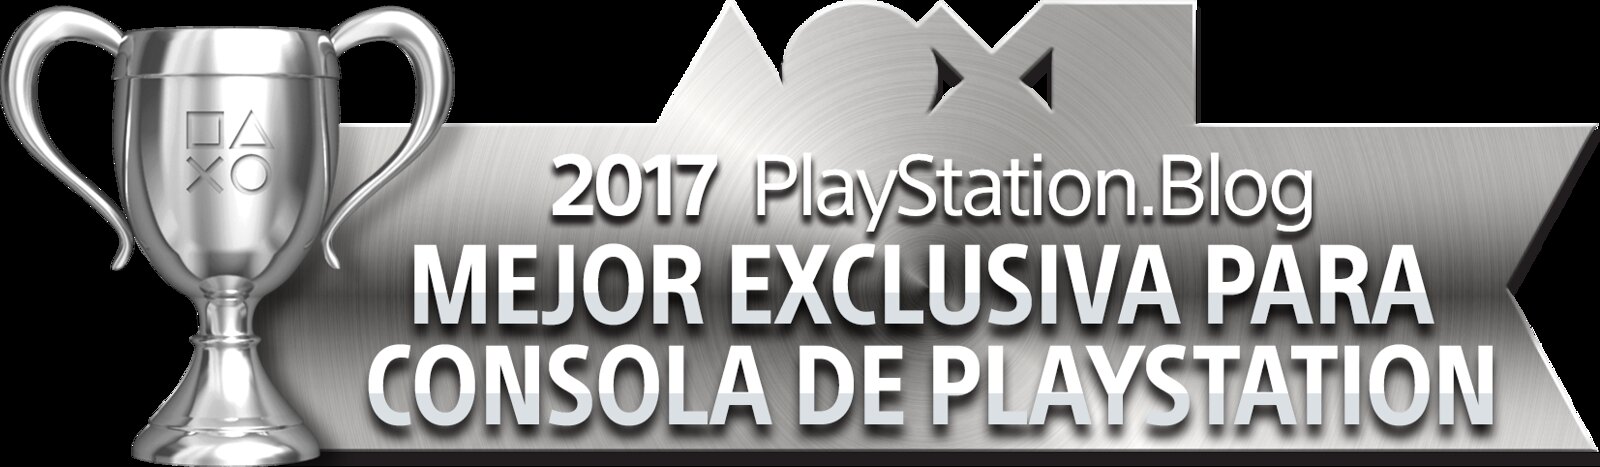 PlayStation Blog Game of the Year 2017 - Best PlayStation Console Exclusive (Silver)